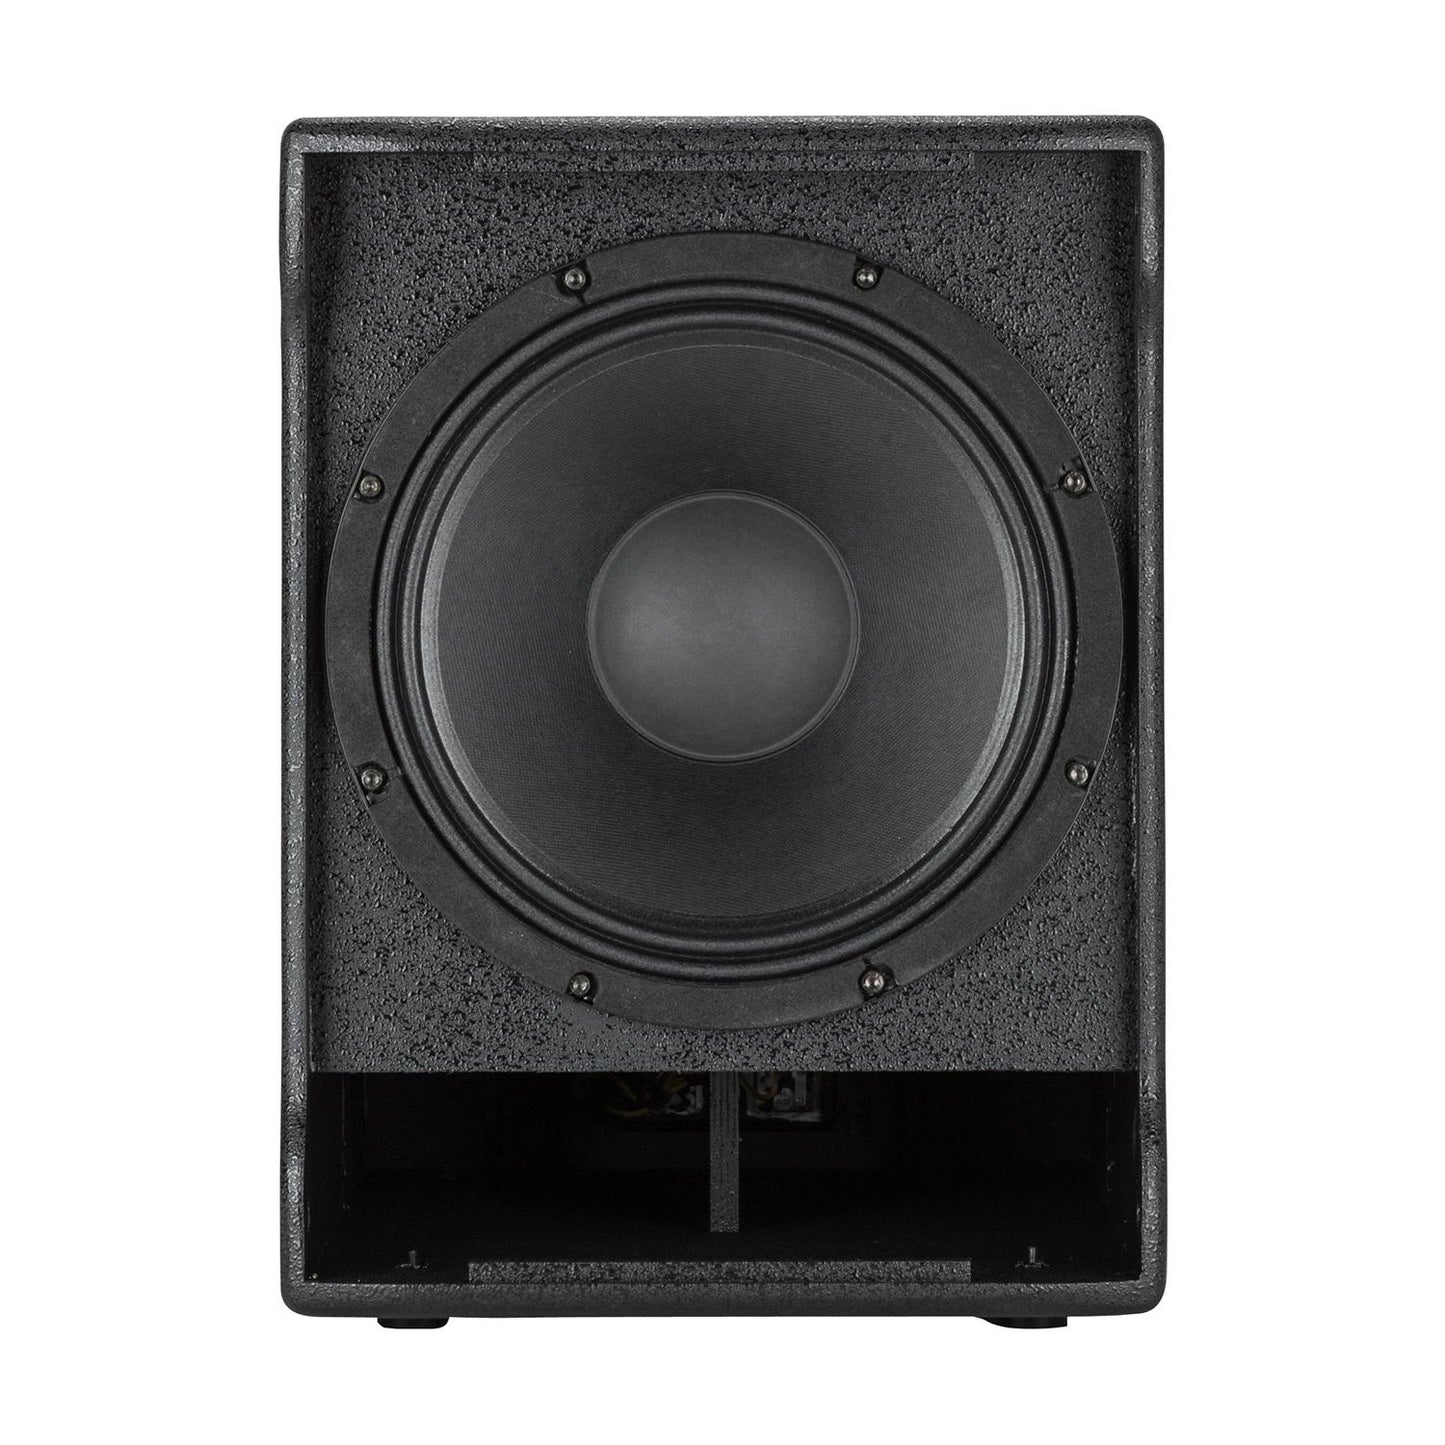 Subwoofer Activo SUB702-AS II RCF.